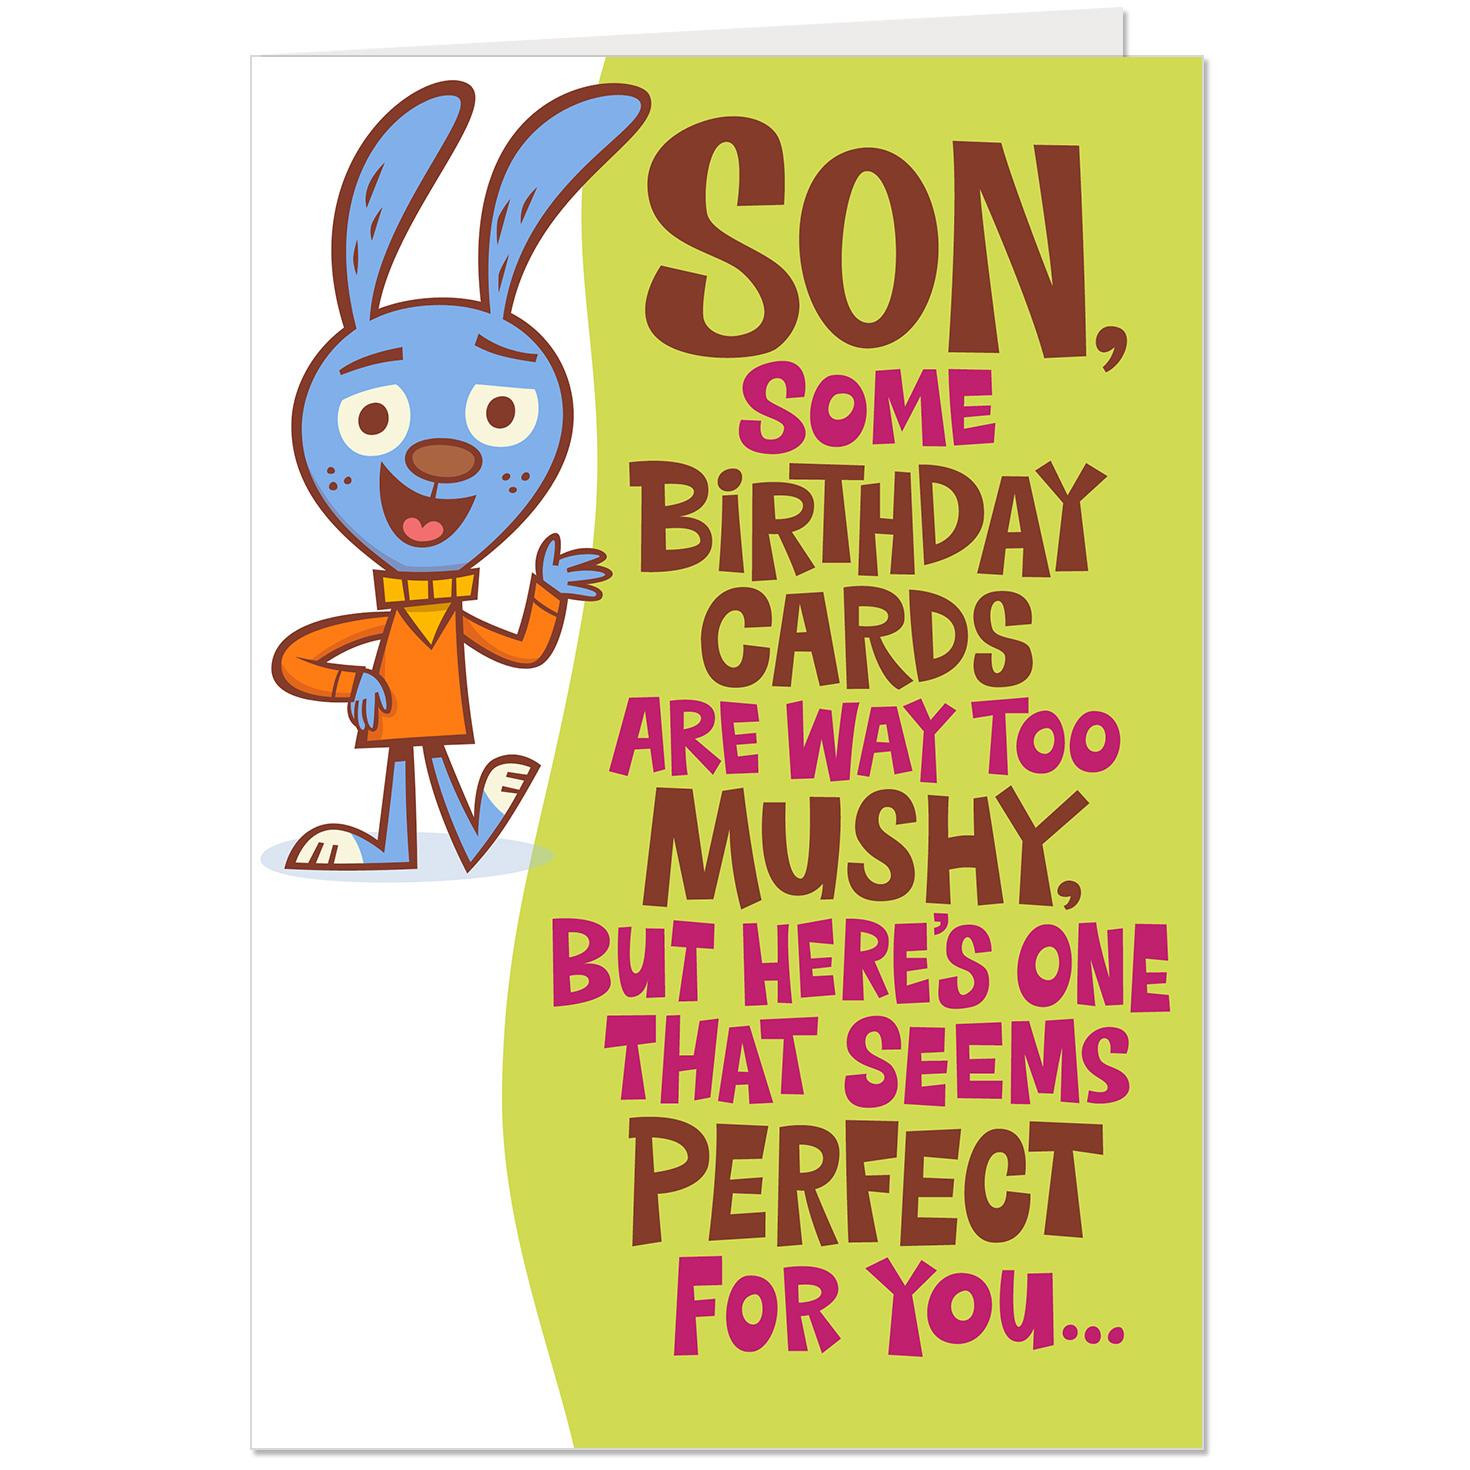 Funny Birthday Cards For Son
 Love Fist Bump Funny Pop Up Birthday Card for Son